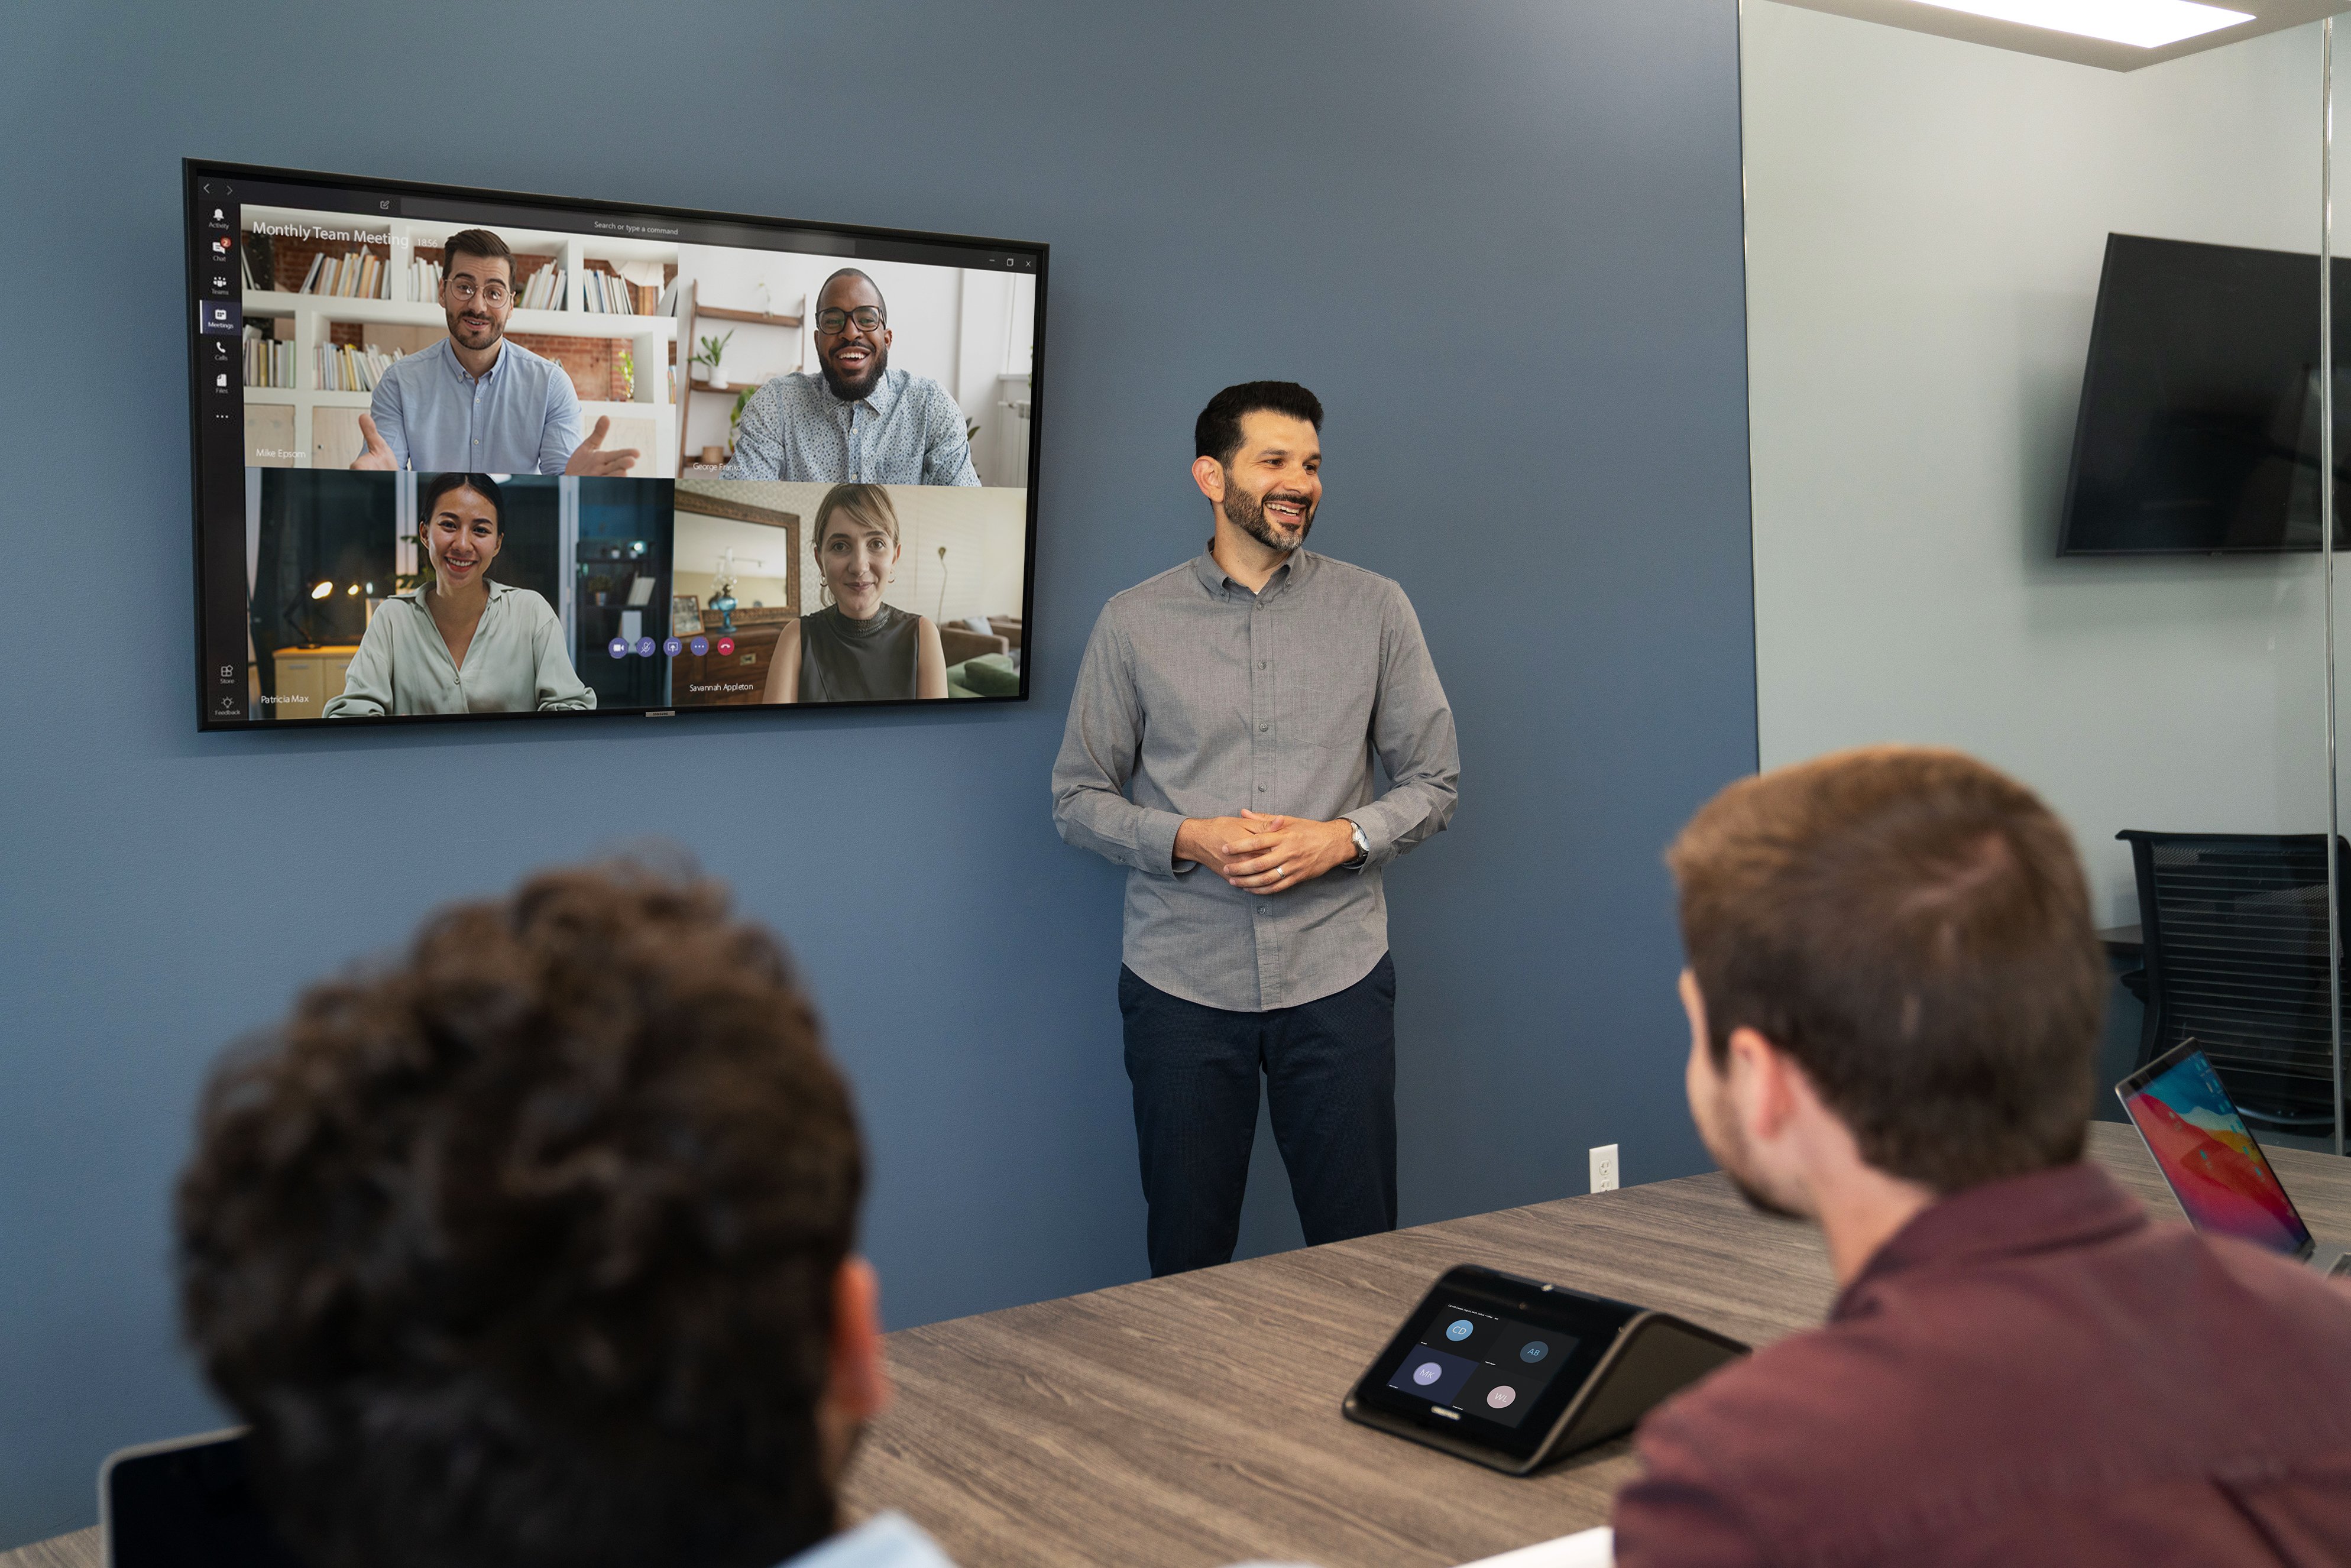 Meeting room video chat on wall screen-1